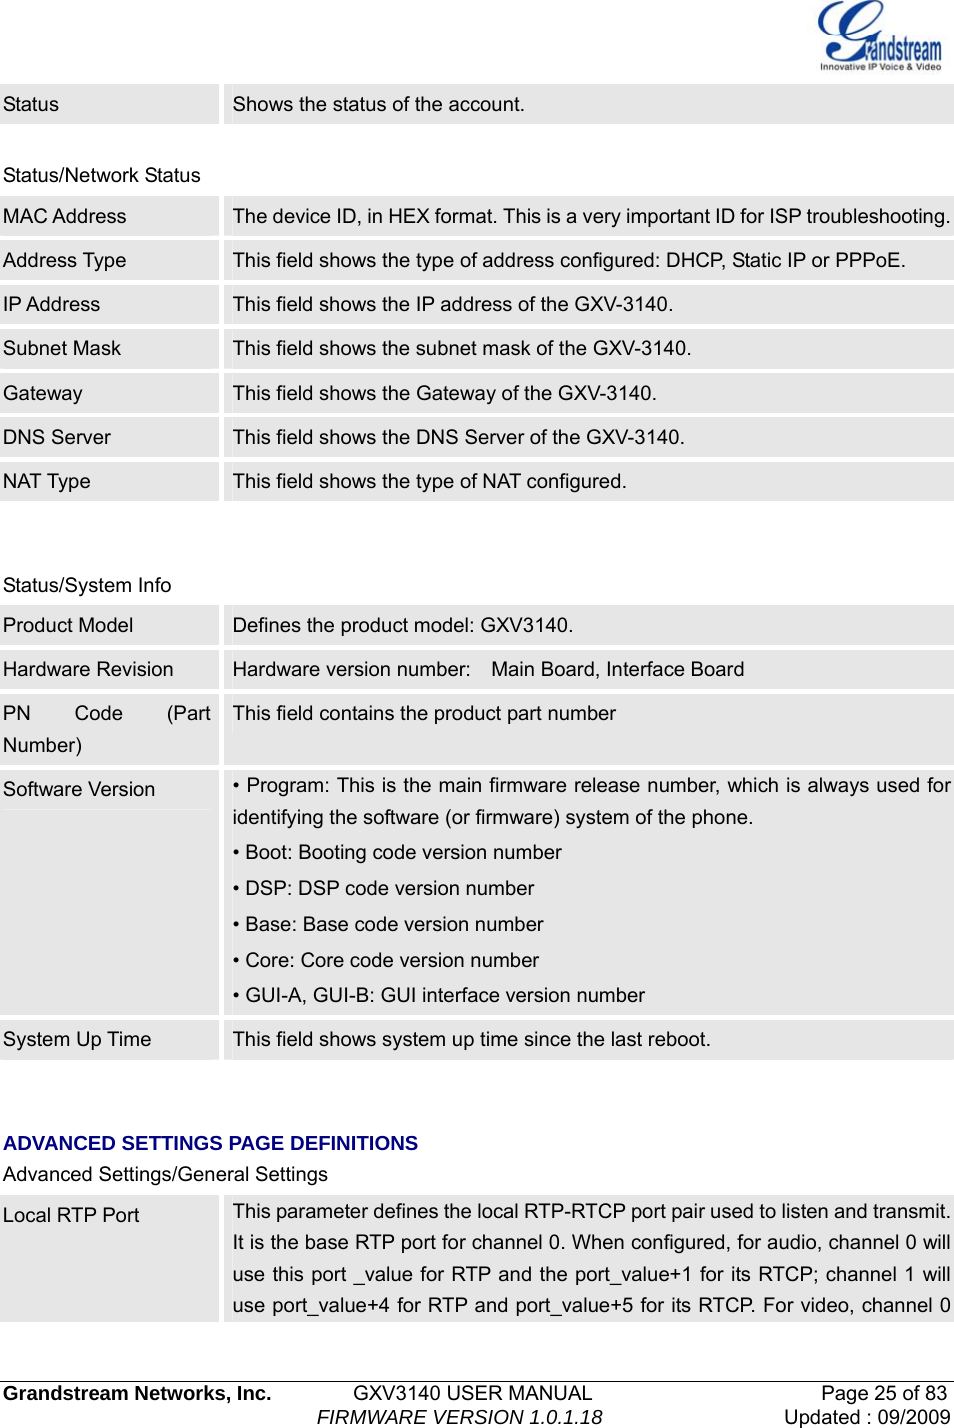   Grandstream Networks, Inc.        GXV3140 USER MANUAL                       Page 25 of 83                                FIRMWARE VERSION 1.0.1.18 Updated : 09/2009  Status  Shows the status of the account.  Status/Network Status MAC Address  The device ID, in HEX format. This is a very important ID for ISP troubleshooting.Address Type  This field shows the type of address configured: DHCP, Static IP or PPPoE. IP Address  This field shows the IP address of the GXV-3140. Subnet Mask  This field shows the subnet mask of the GXV-3140. Gateway  This field shows the Gateway of the GXV-3140. DNS Server  This field shows the DNS Server of the GXV-3140. NAT Type  This field shows the type of NAT configured.   Status/System Info Product Model  Defines the product model: GXV3140. Hardware Revision    Hardware version number:    Main Board, Interface Board PN Code (Part Number) This field contains the product part number Software Version  • Program: This is the main firmware release number, which is always used for identifying the software (or firmware) system of the phone. • Boot: Booting code version number • DSP: DSP code version number • Base: Base code version number • Core: Core code version number • GUI-A, GUI-B: GUI interface version number System Up Time  This field shows system up time since the last reboot.   ADVANCED SETTINGS PAGE DEFINITIONS Advanced Settings/General Settings Local RTP Port  This parameter defines the local RTP-RTCP port pair used to listen and transmit. It is the base RTP port for channel 0. When configured, for audio, channel 0 will use this port _value for RTP and the port_value+1 for its RTCP; channel 1 will use port_value+4 for RTP and port_value+5 for its RTCP. For video, channel 0 